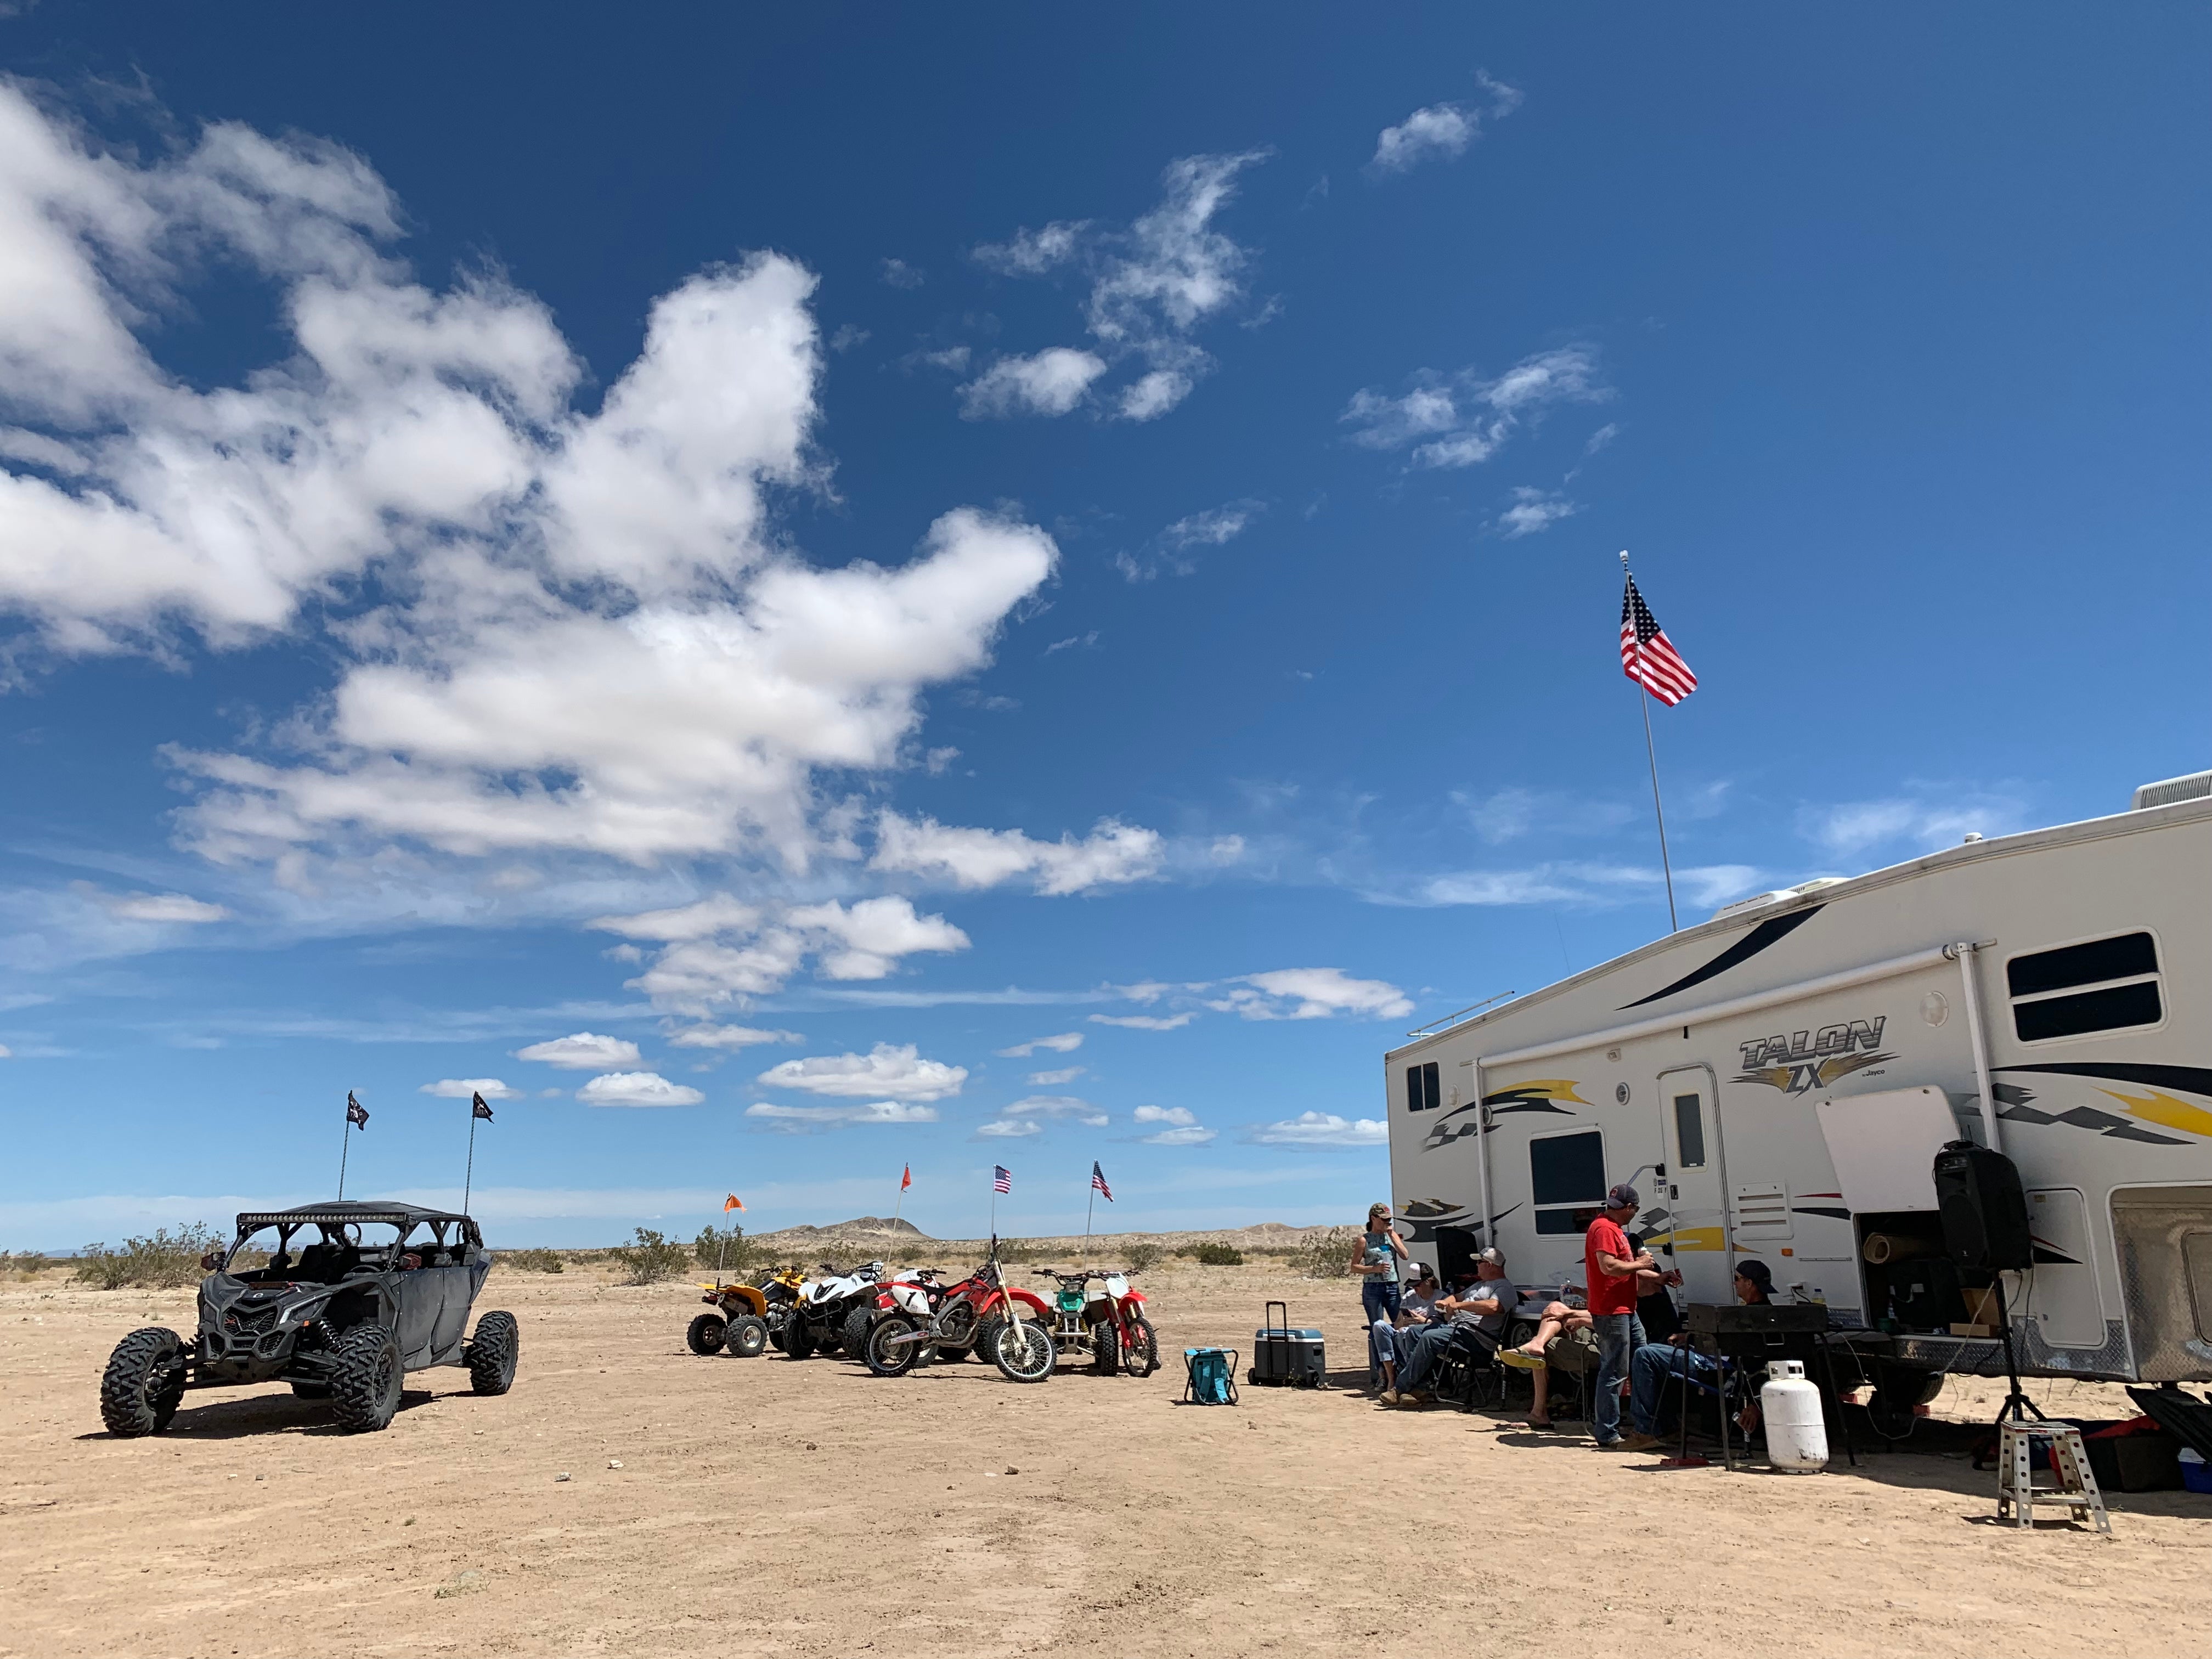 Camper submitted image from Ocotillo Wells State Vehicular Recreation Area - 5